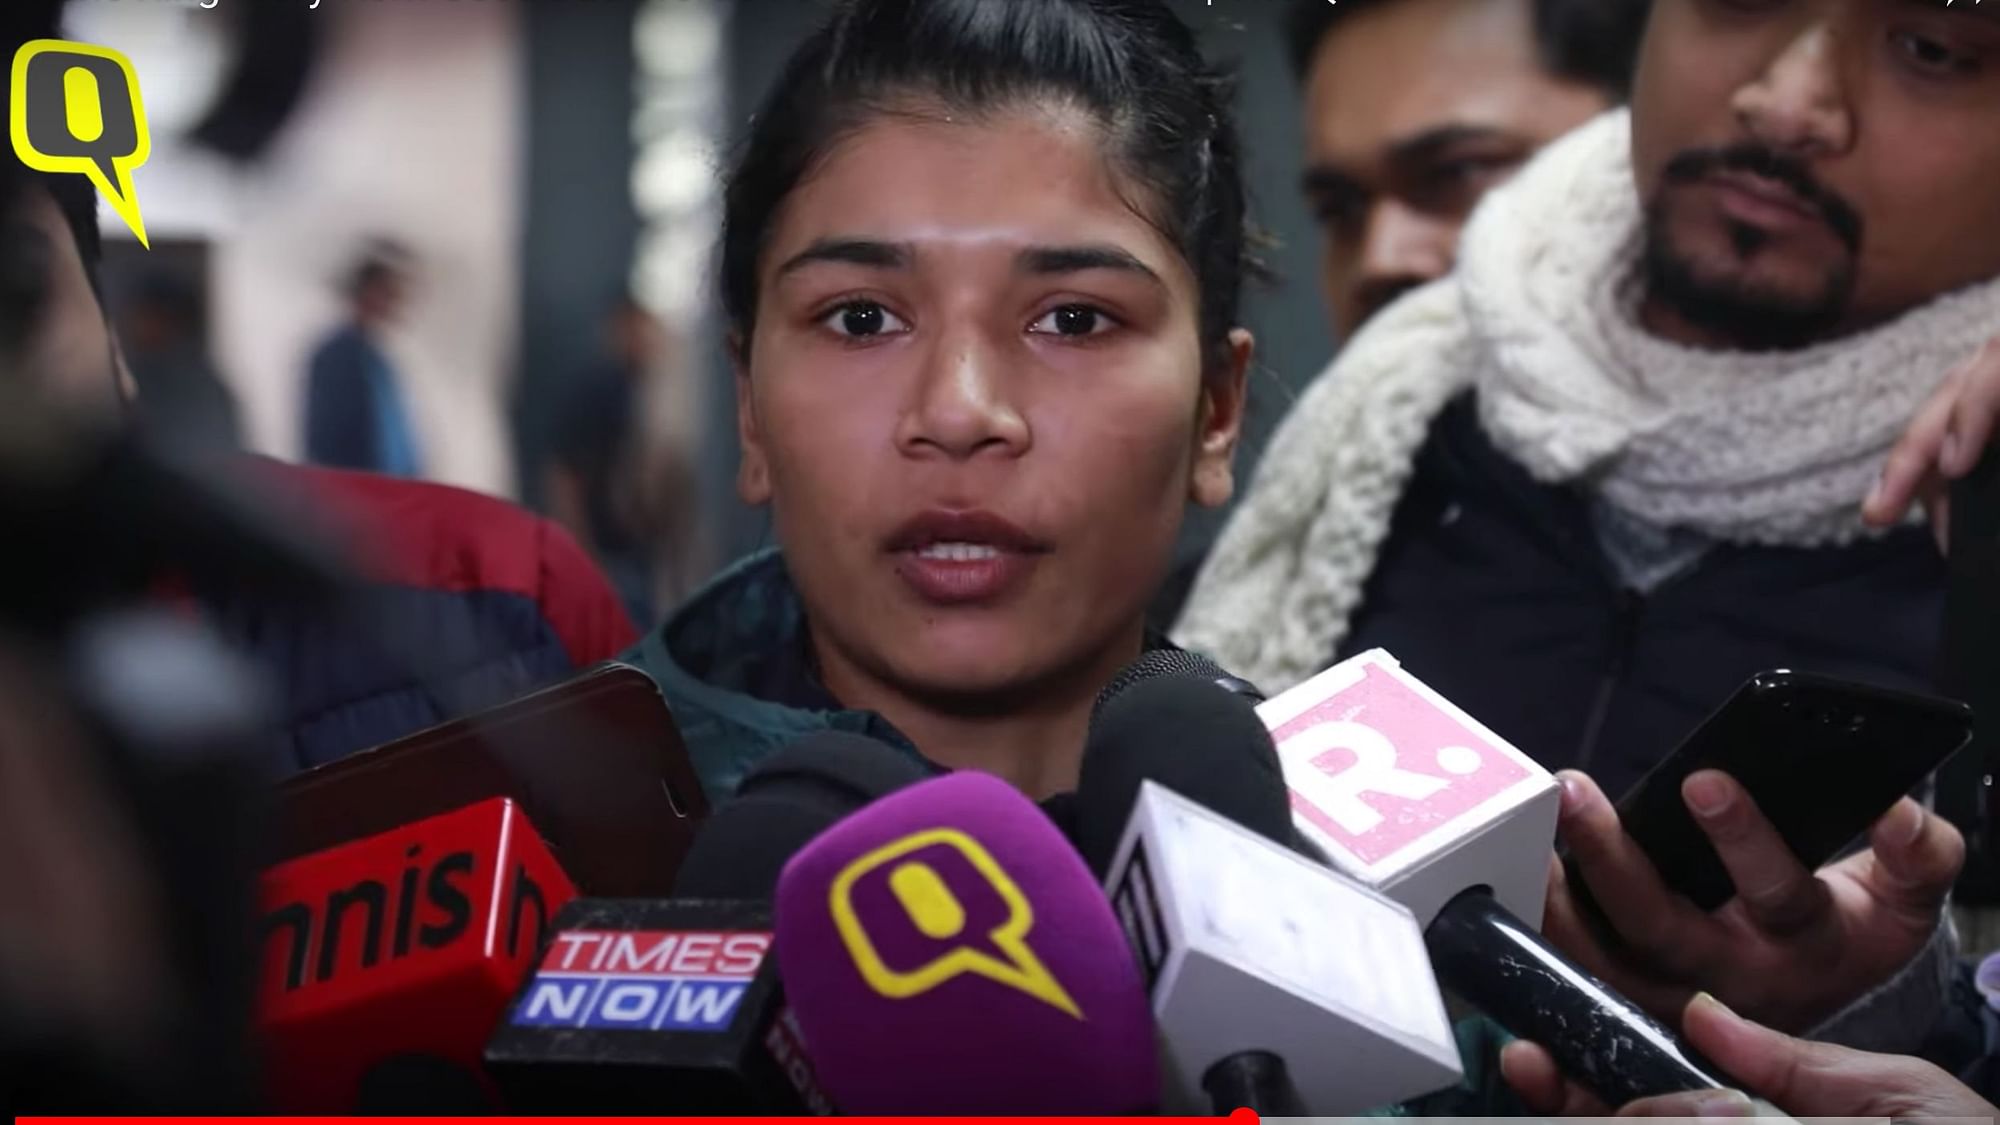 Nikhat Zareen said MC Mary Kom used bad words for her and also refused to shake her hand after their boxing match.